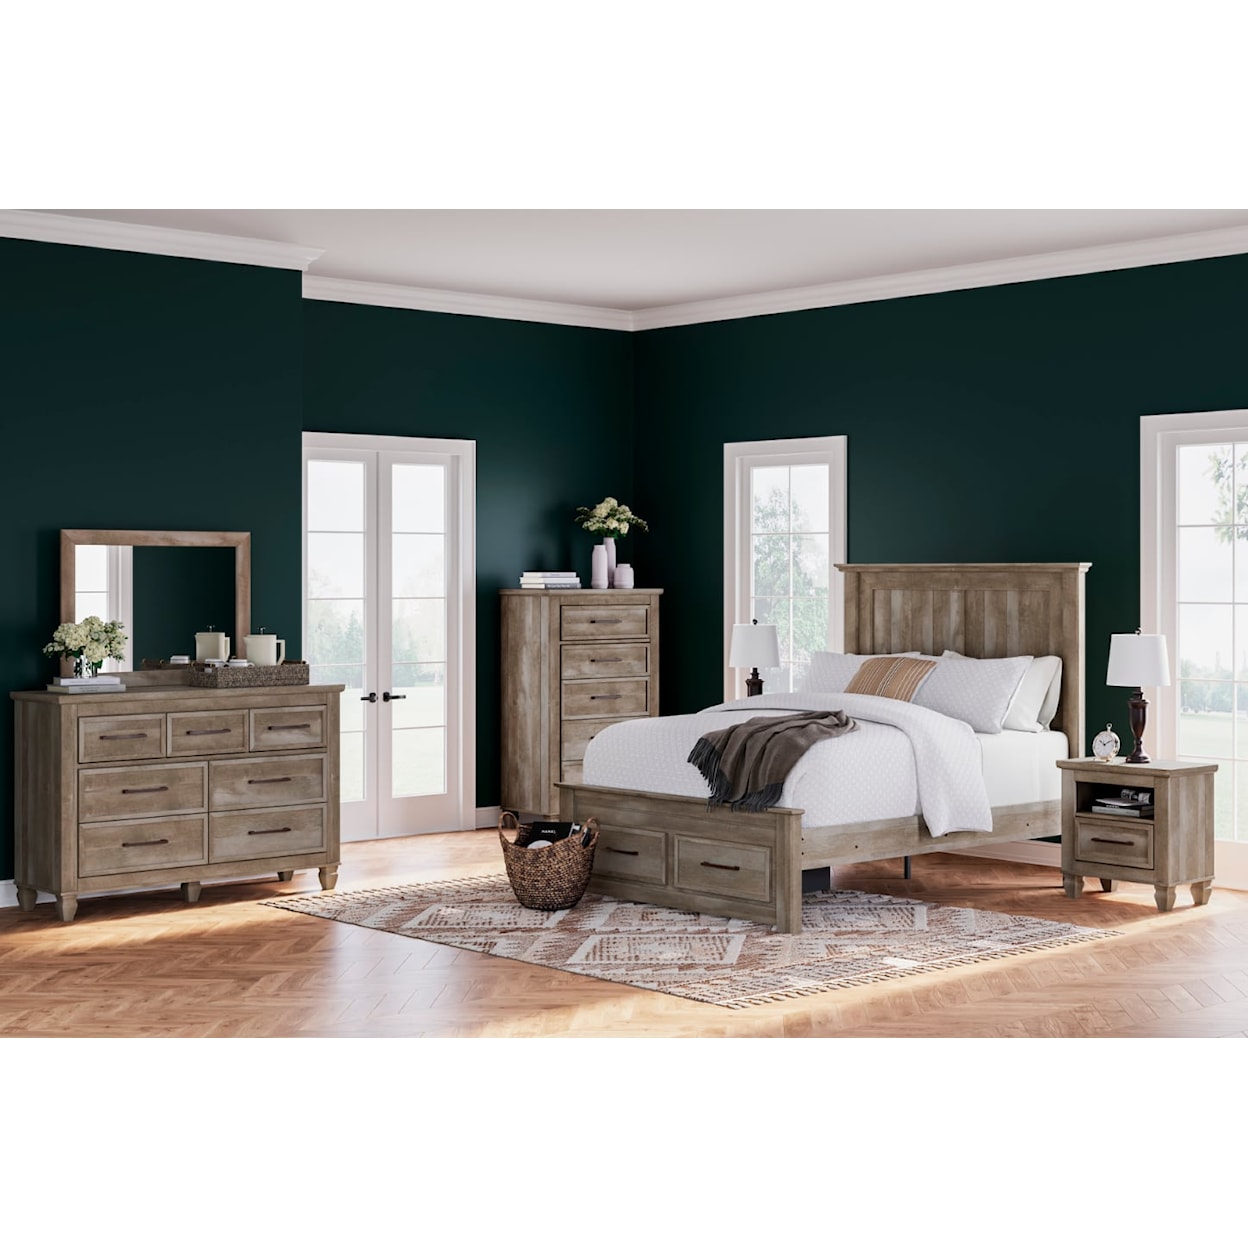 Signature Design by Ashley Yarbeck Queen Bedroom Set